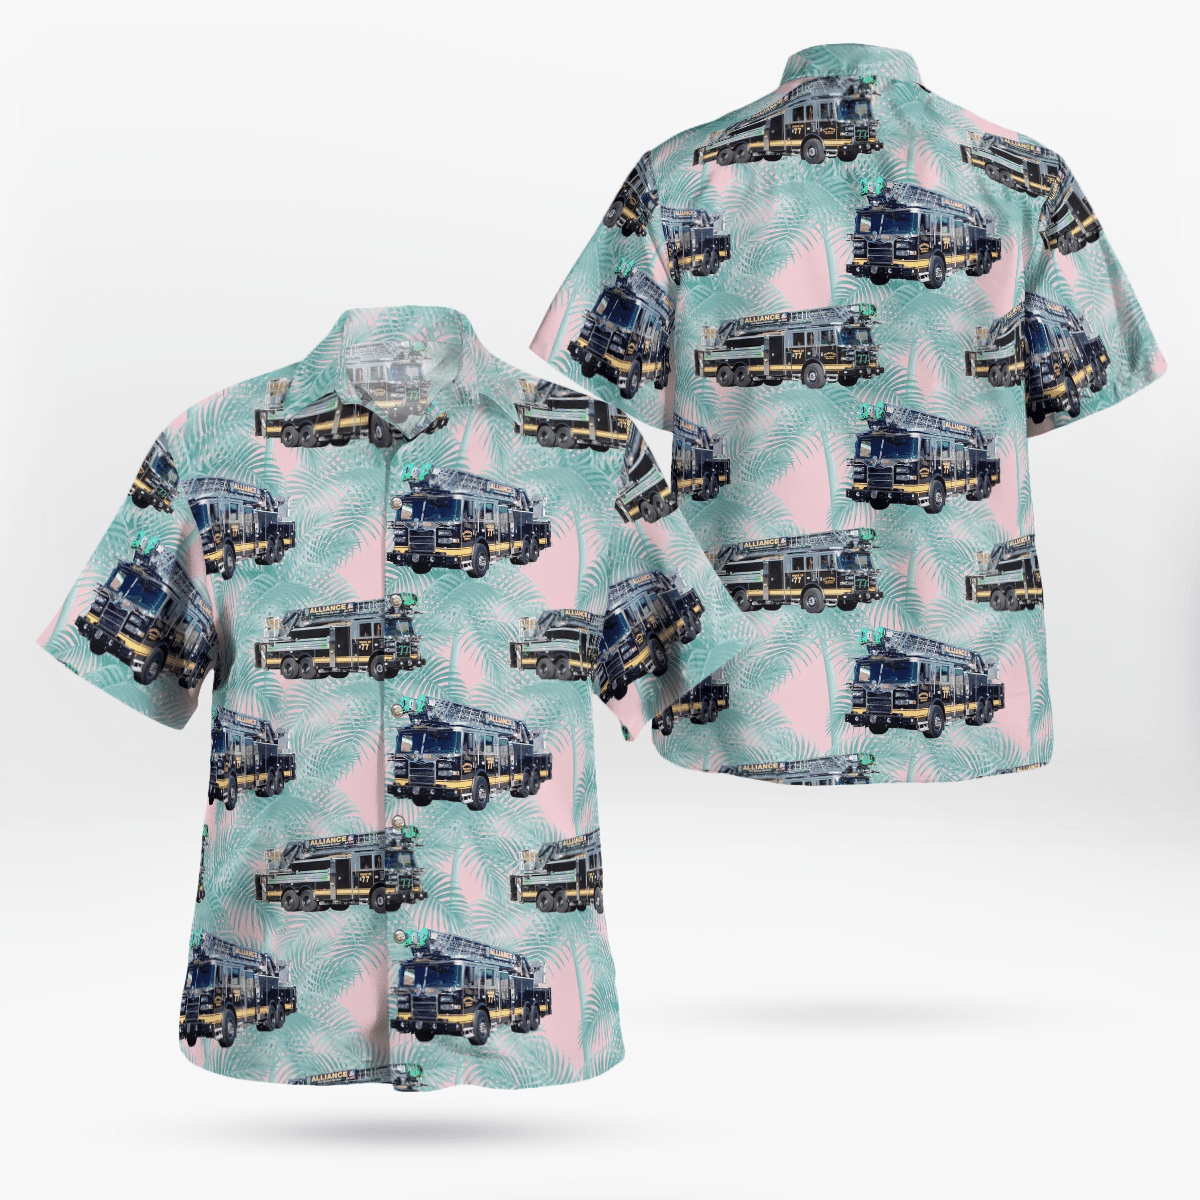 Shop now to find the perfect Hawaii Shirt for your hobby 148